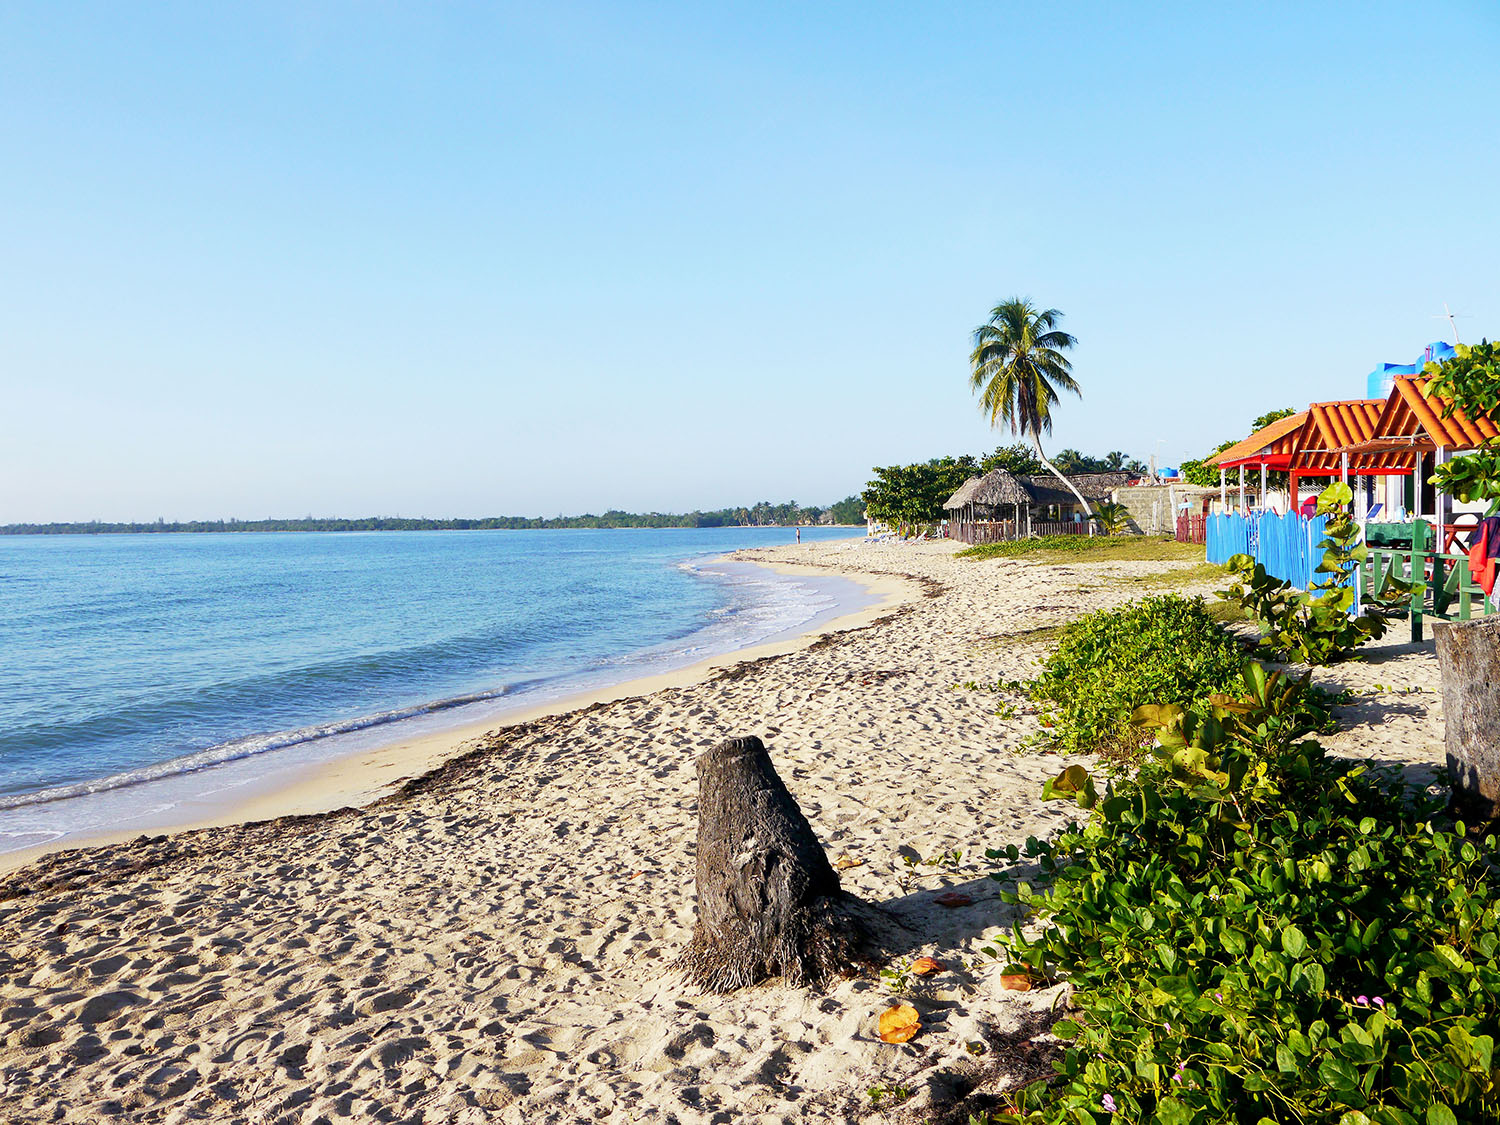 A photo of Playa Larga, one of two beaches that were invaded on the Bahía de Cochinos (Bay of Pigs).